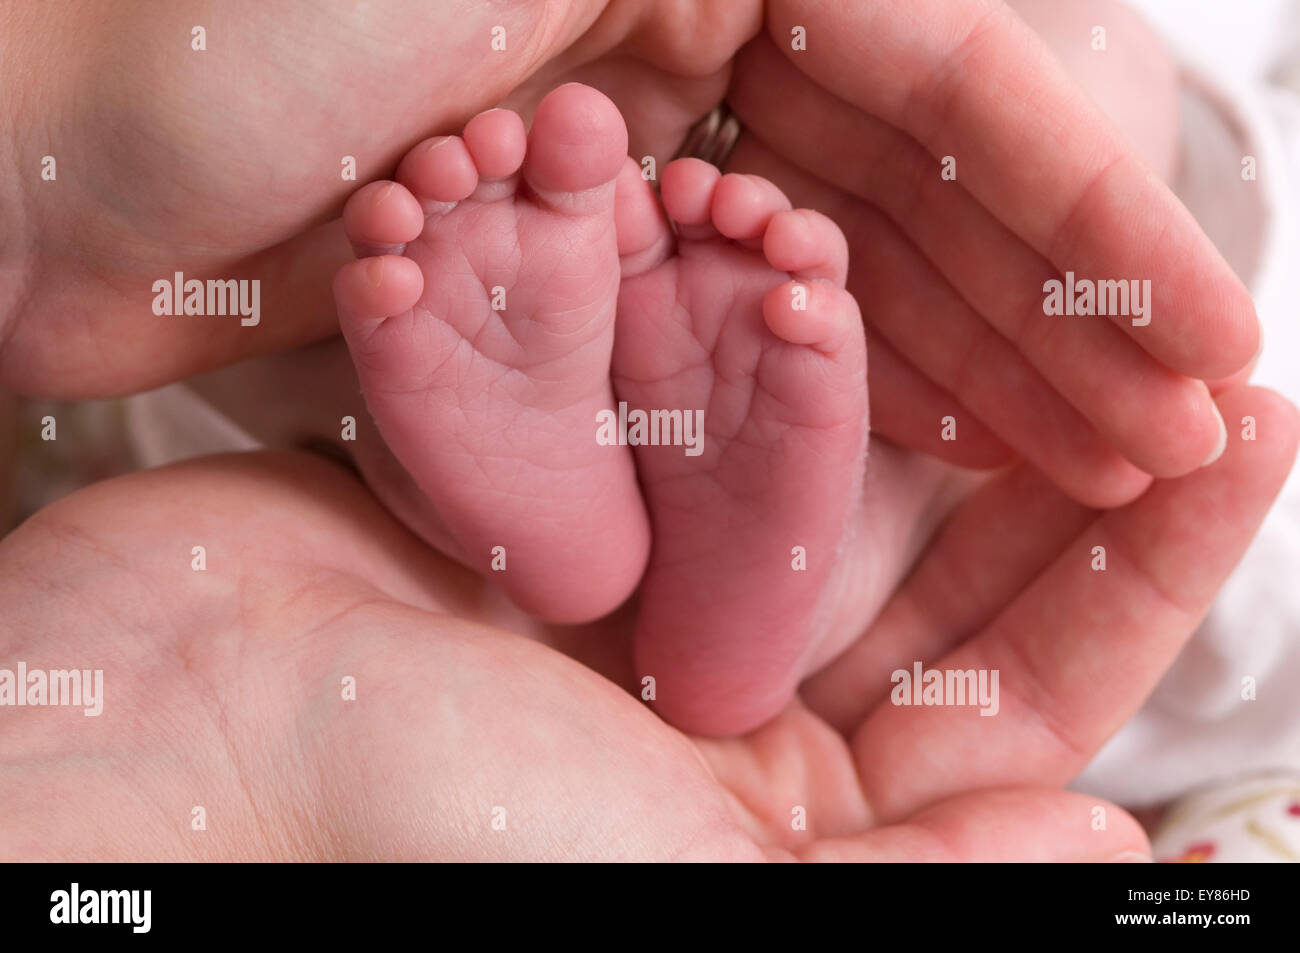 Close up of newborn baby's feet cupped in mums hands Stock Photo